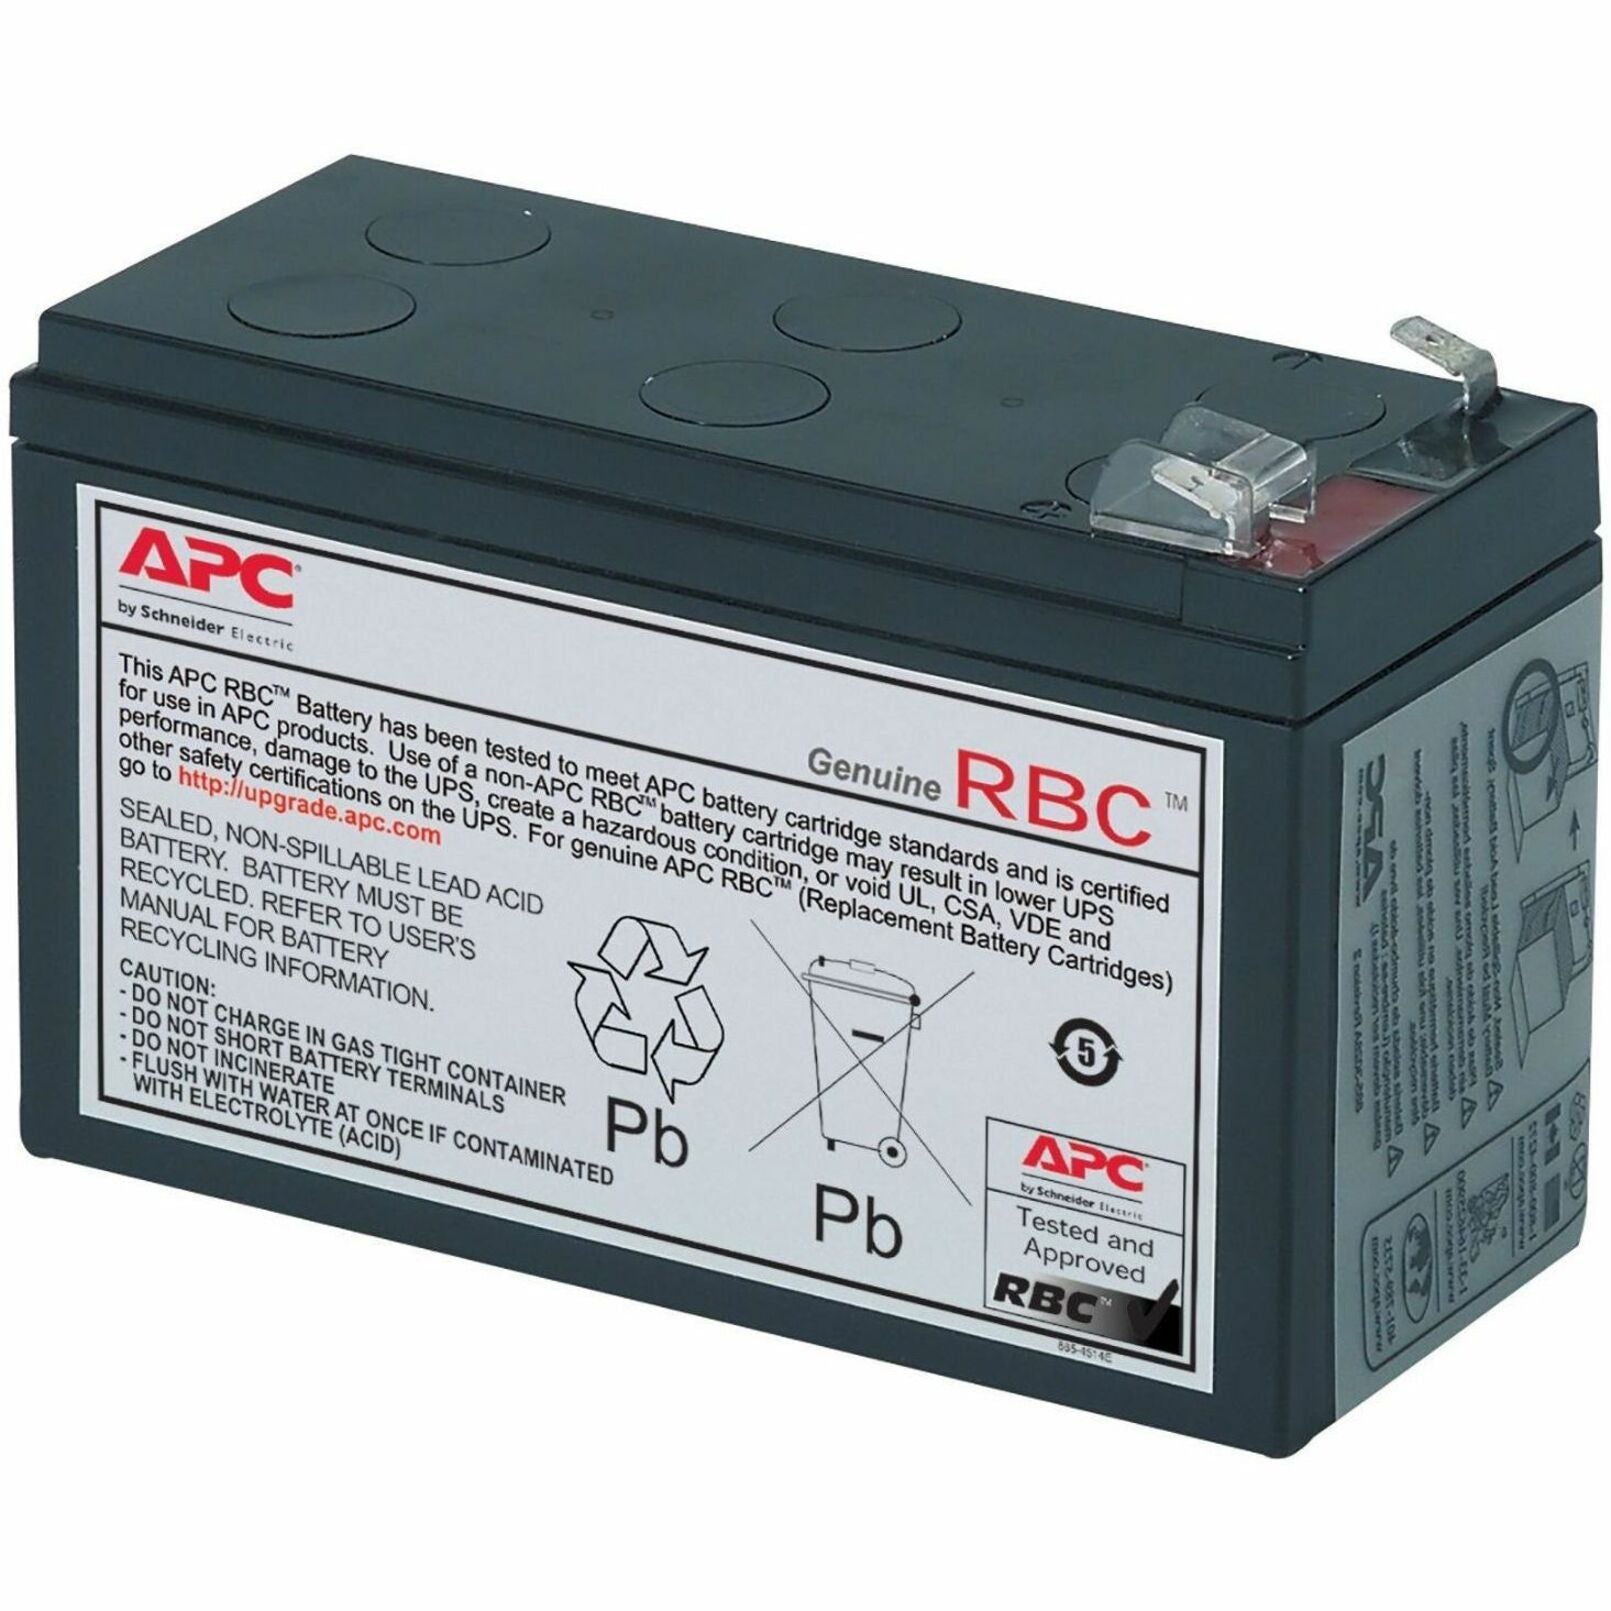 APC RBC17 Replacement Battery Cartridge #17, 2 Year Warranty, Hot Swappable, Lead Acid, Maintenance-free